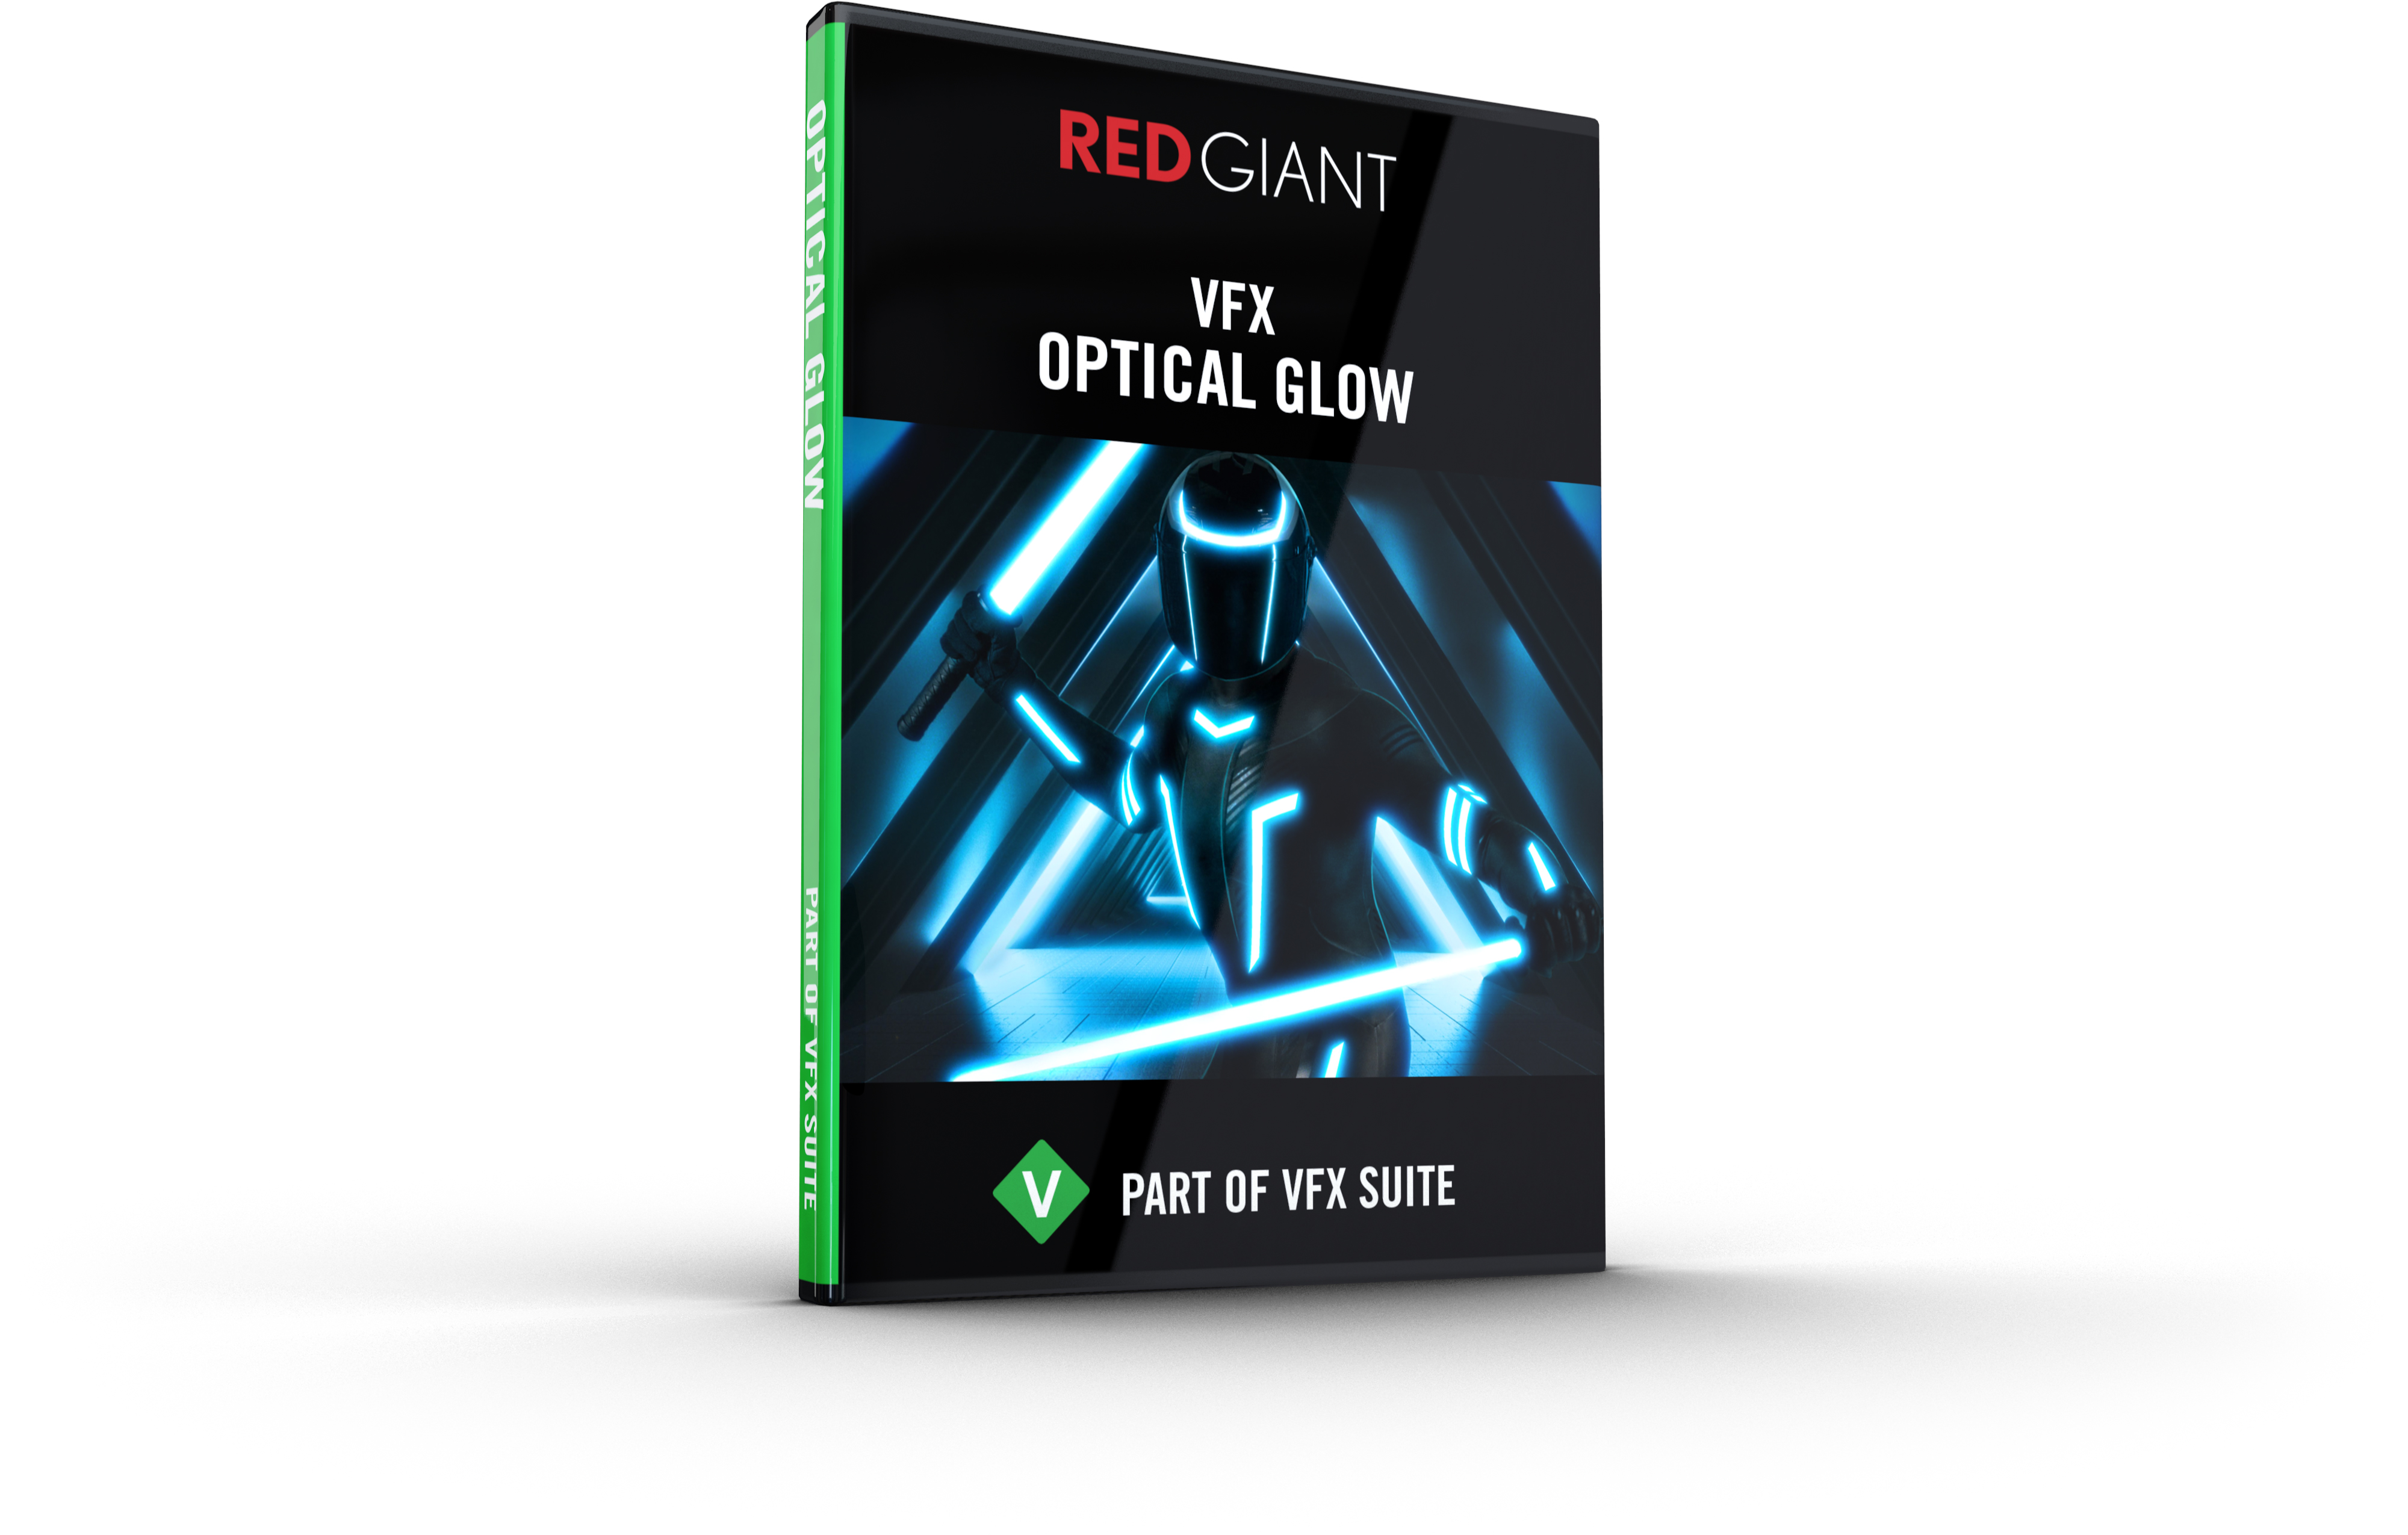 Red Giant Trapcode Suite 12.1.8